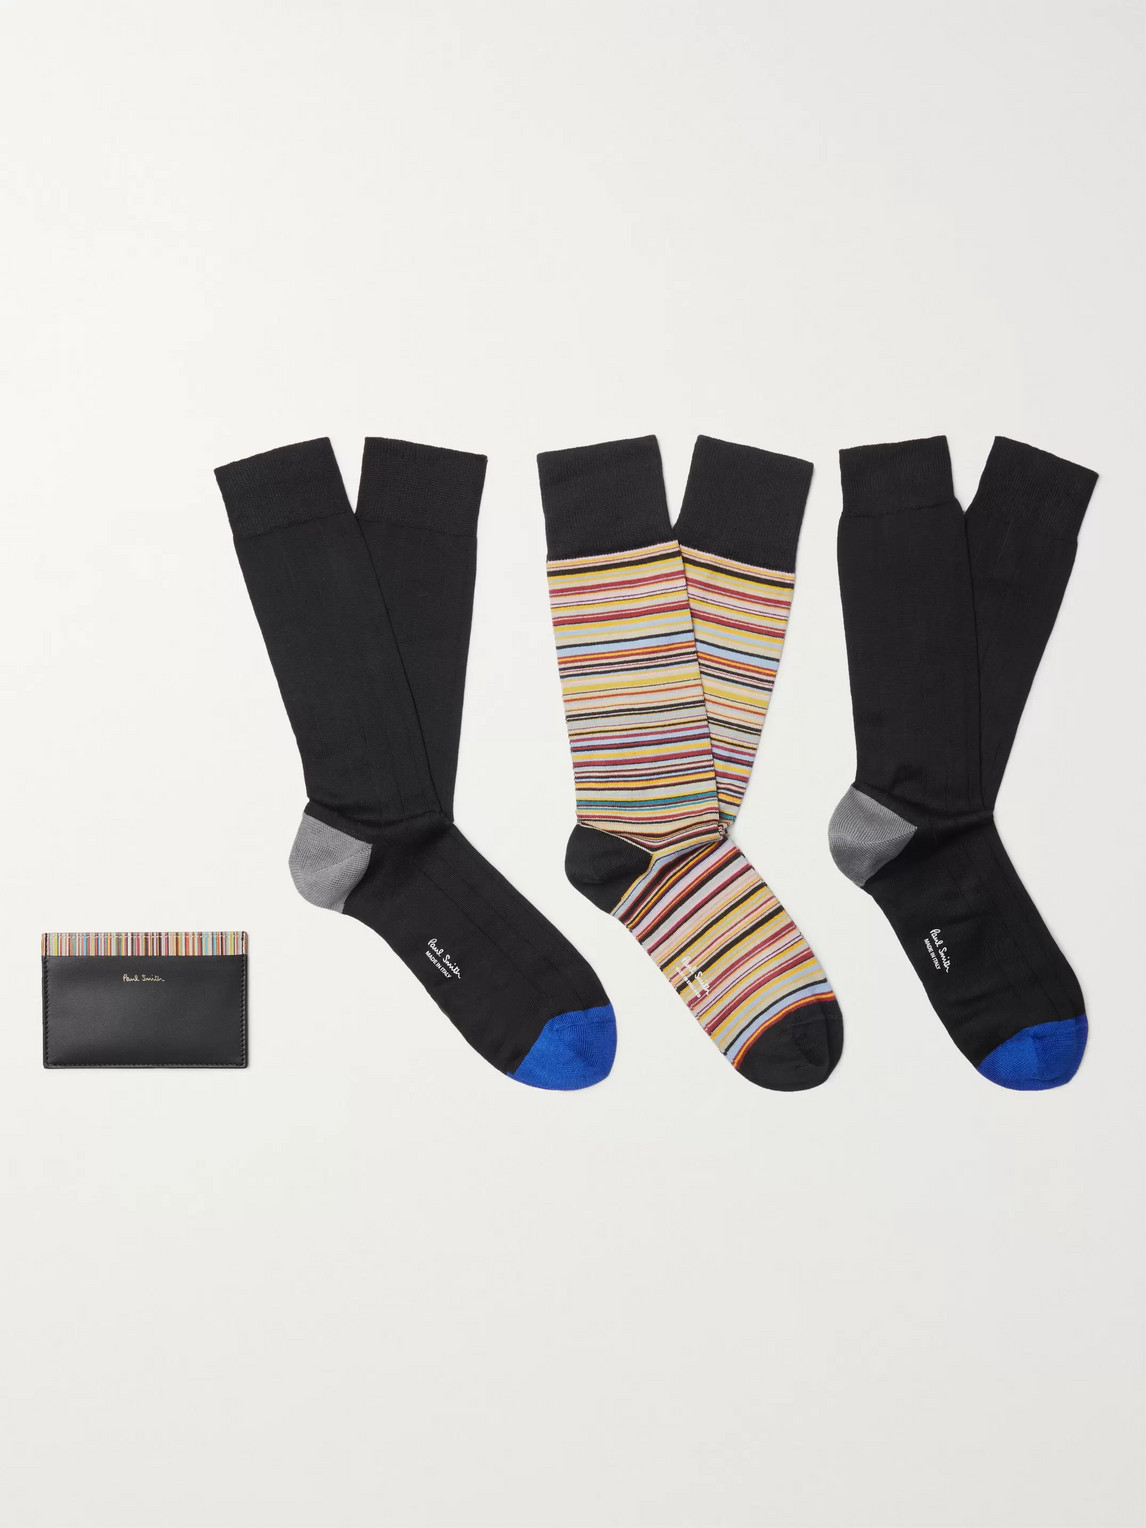 PAUL SMITH LEATHER CARDHOLDER AND COTTON-BLEND SOCKS GIFT SET